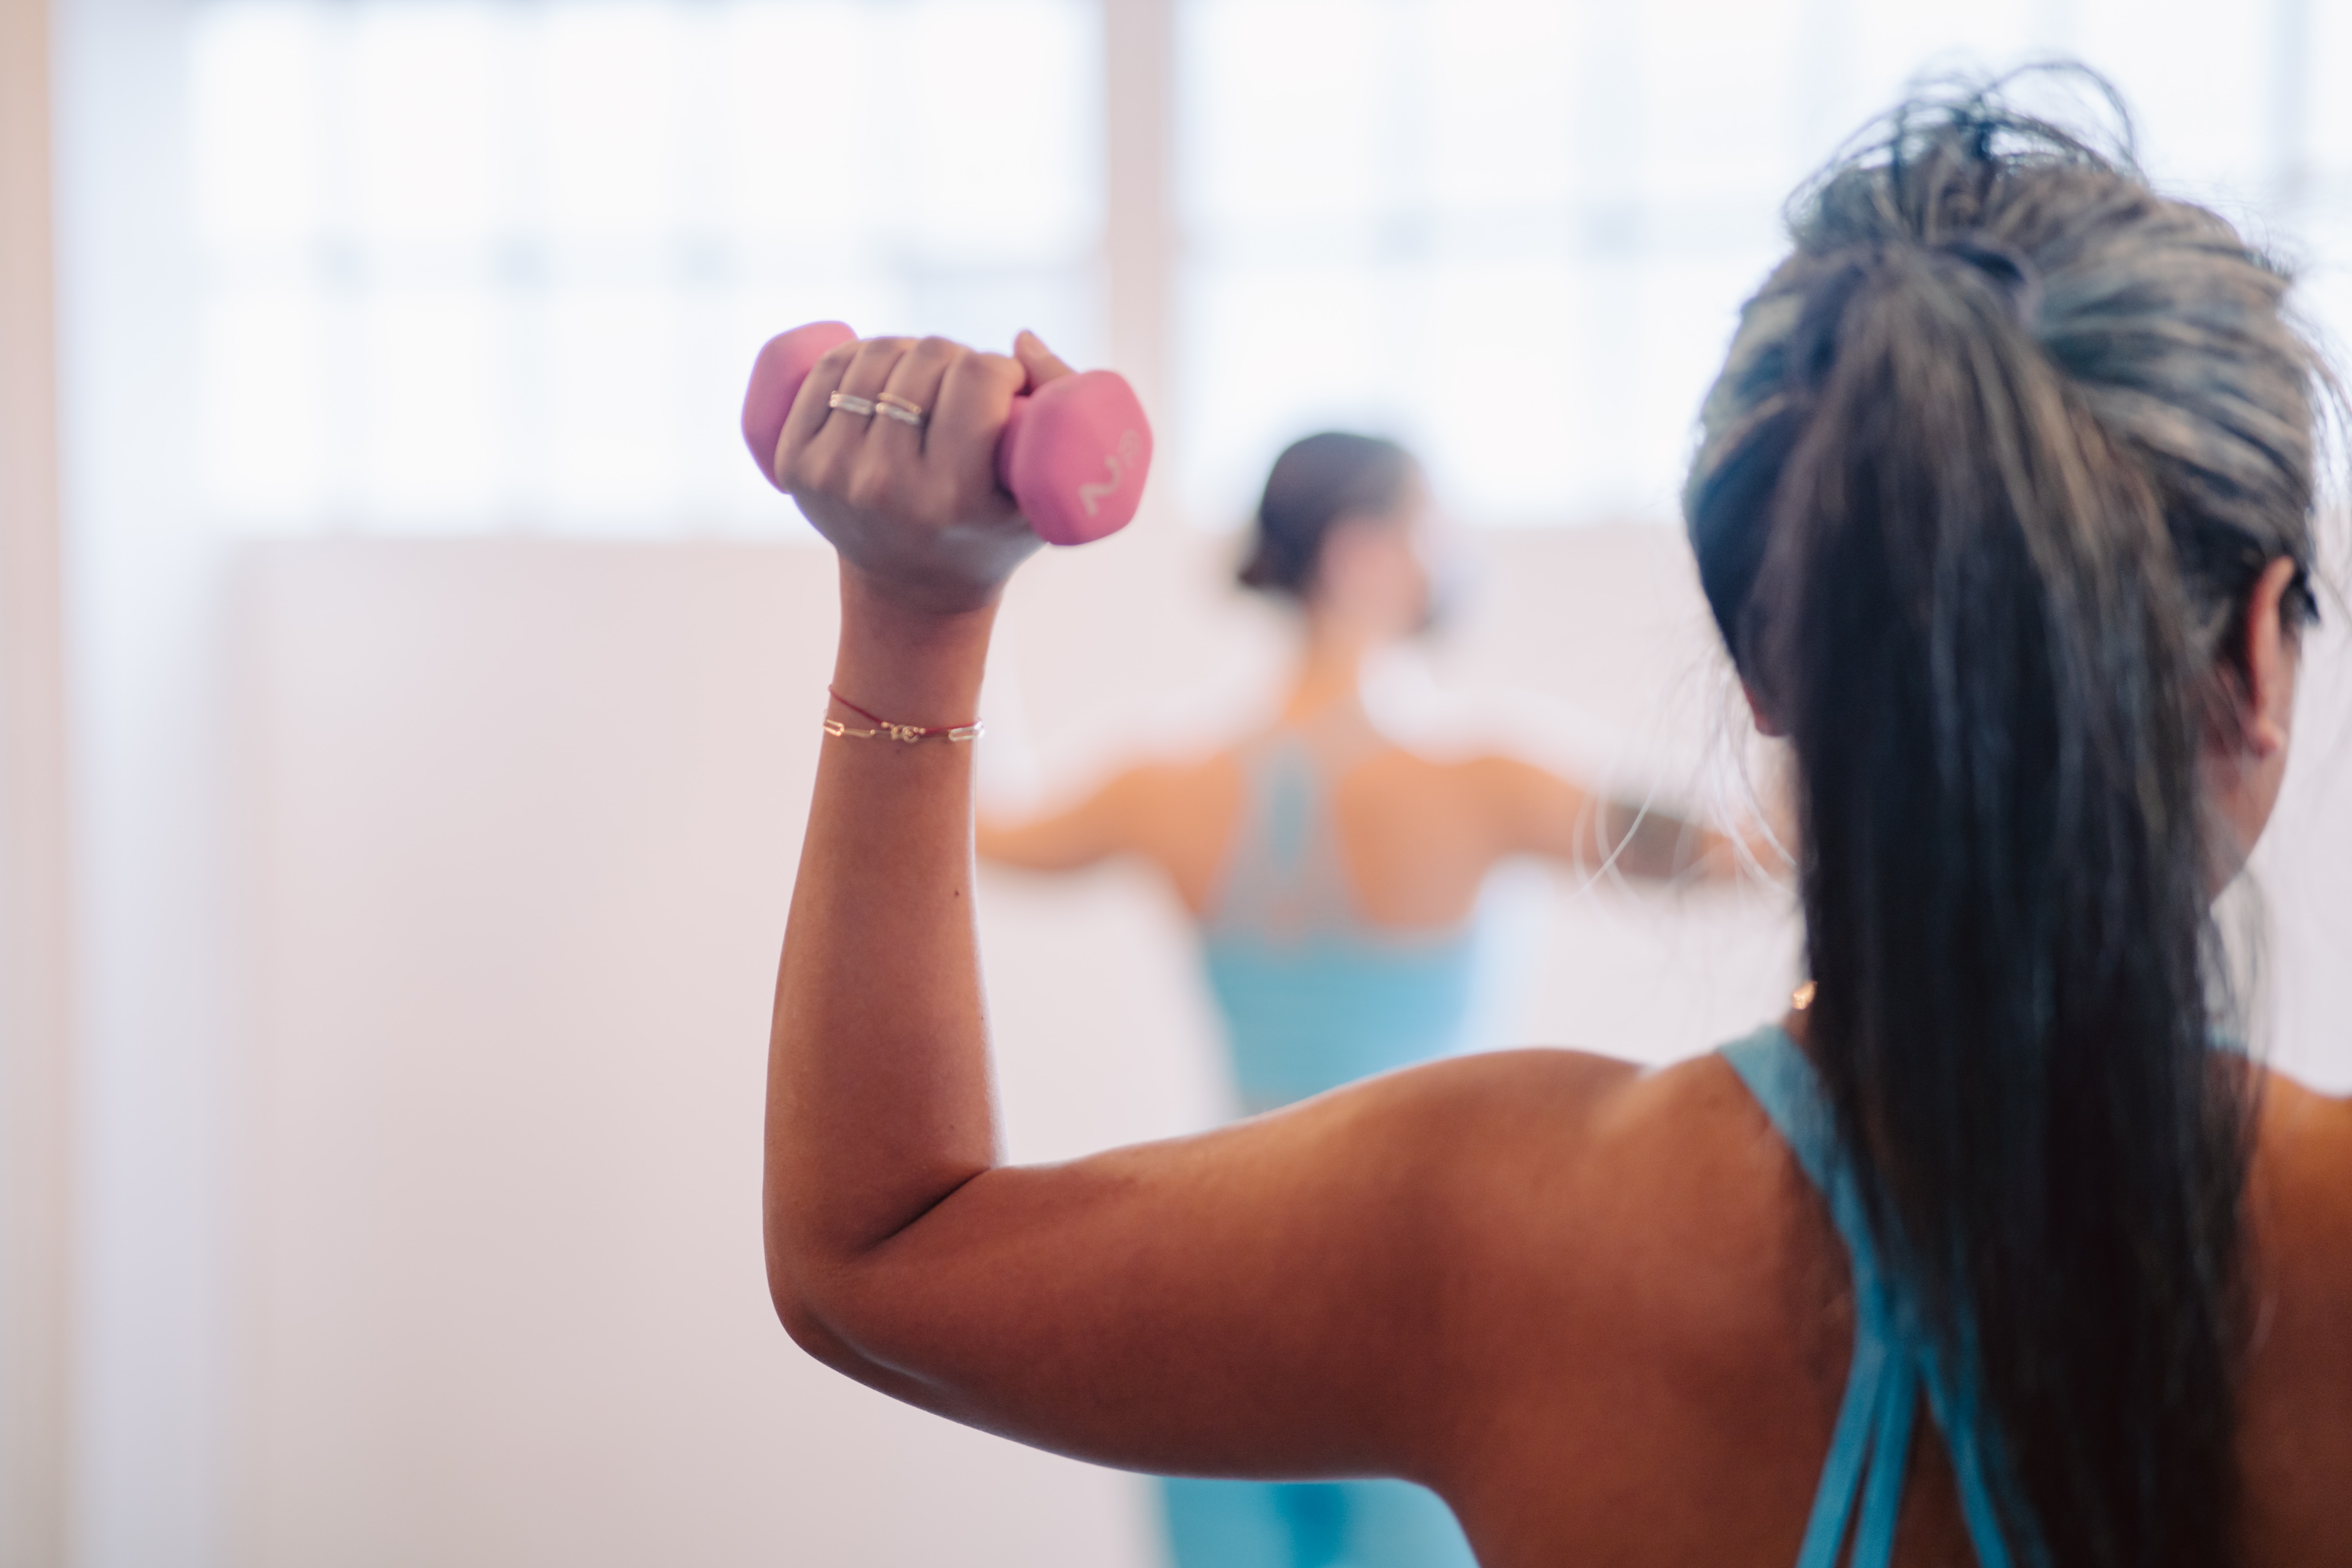 Research suggests weightlifting may be beneficial for postmenopausal and perimenopause women. Image: Alexandra Tran / Unsplash